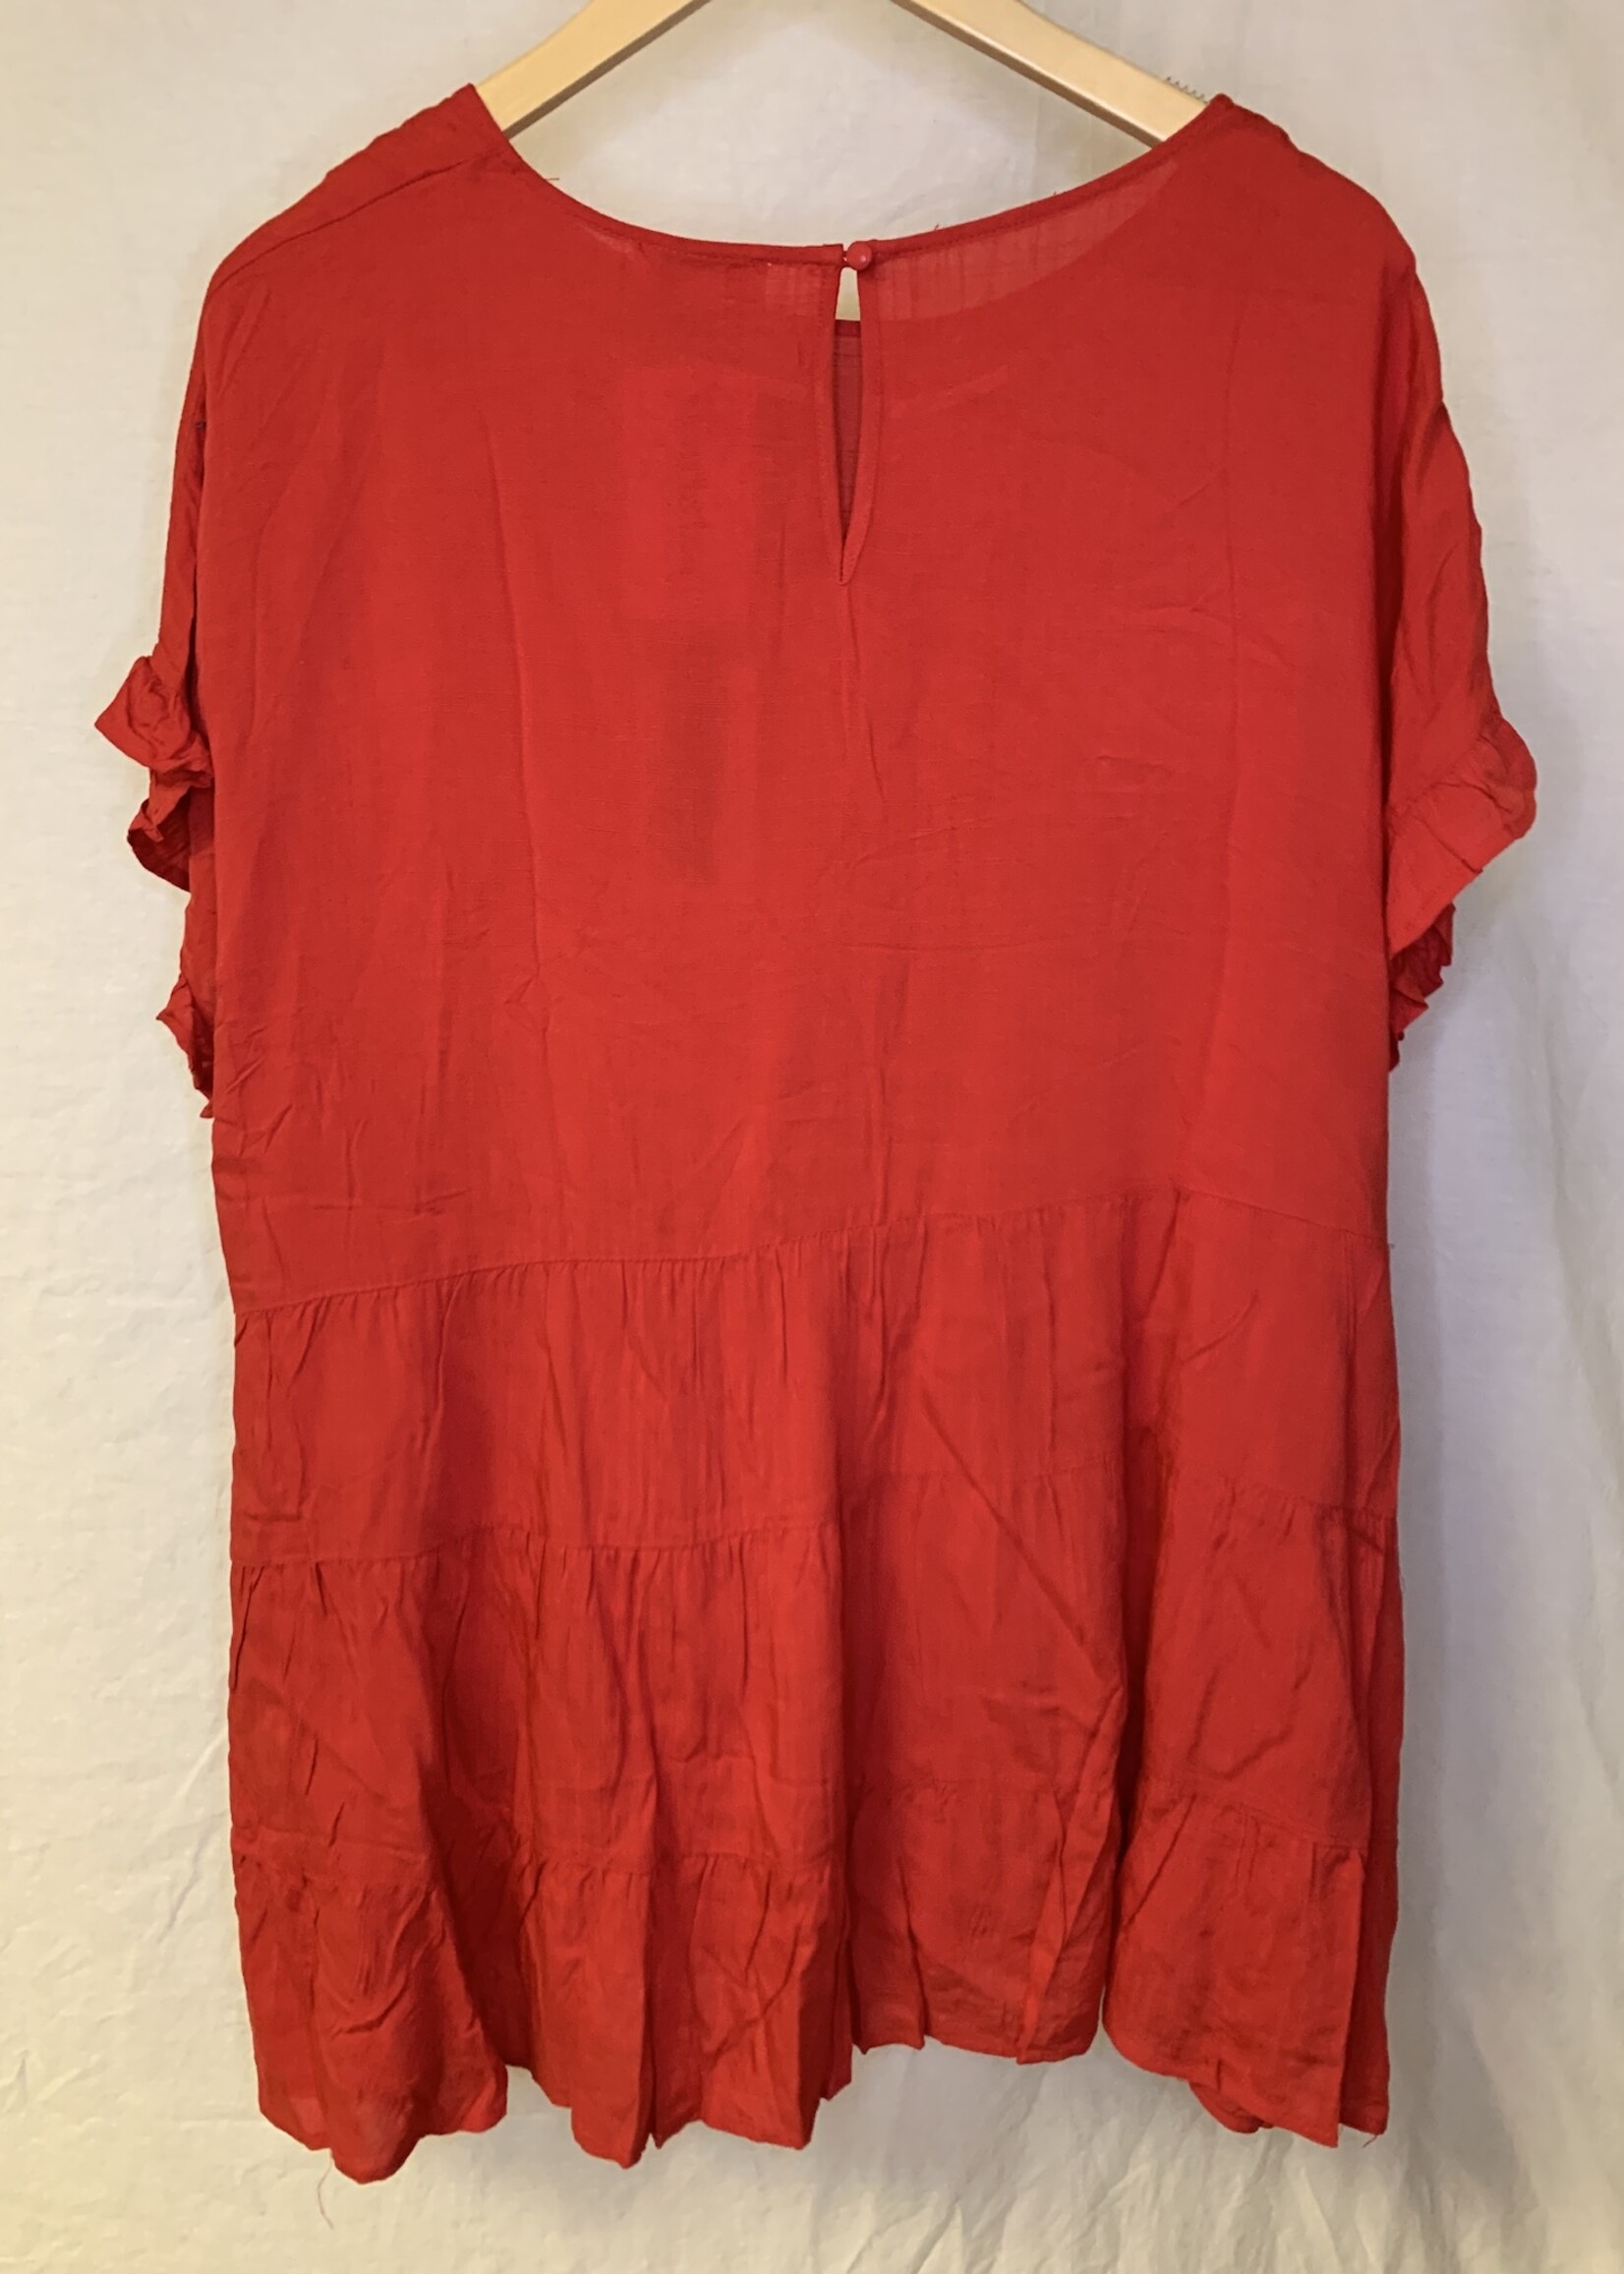 Andree by Unit T Shirt- Tomato Red